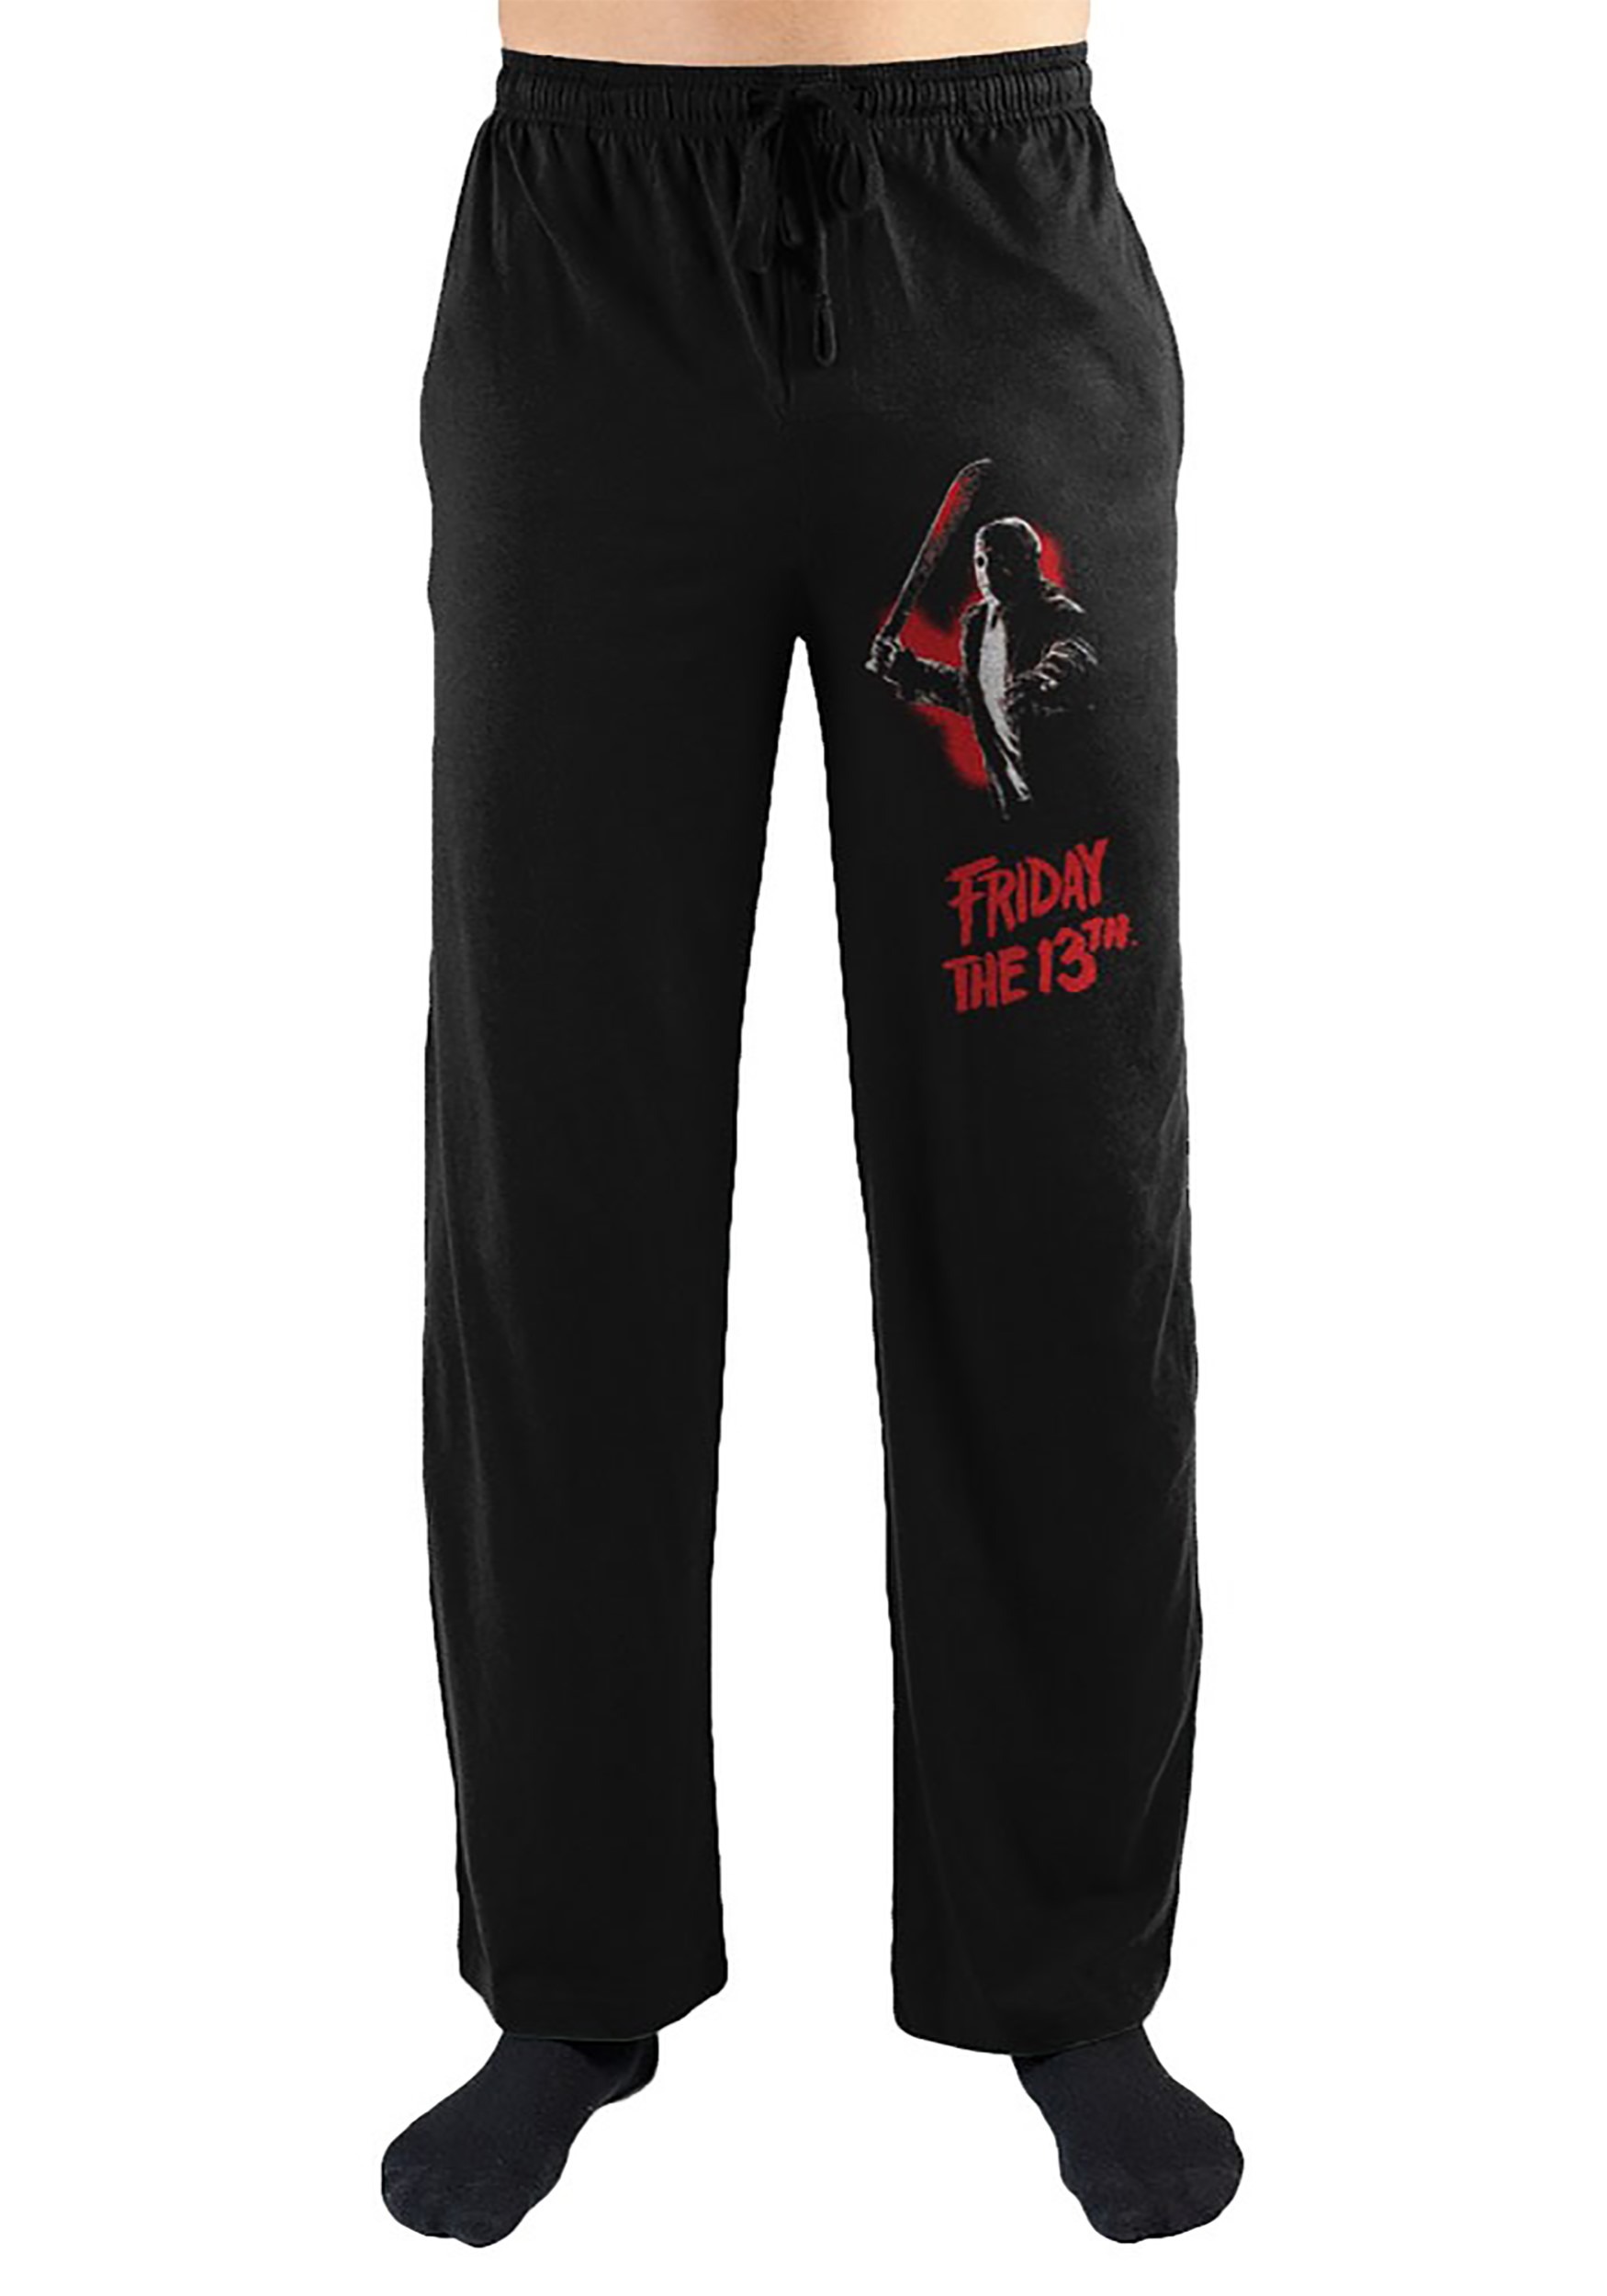 Friday the 13th Sleep Pants for Adults